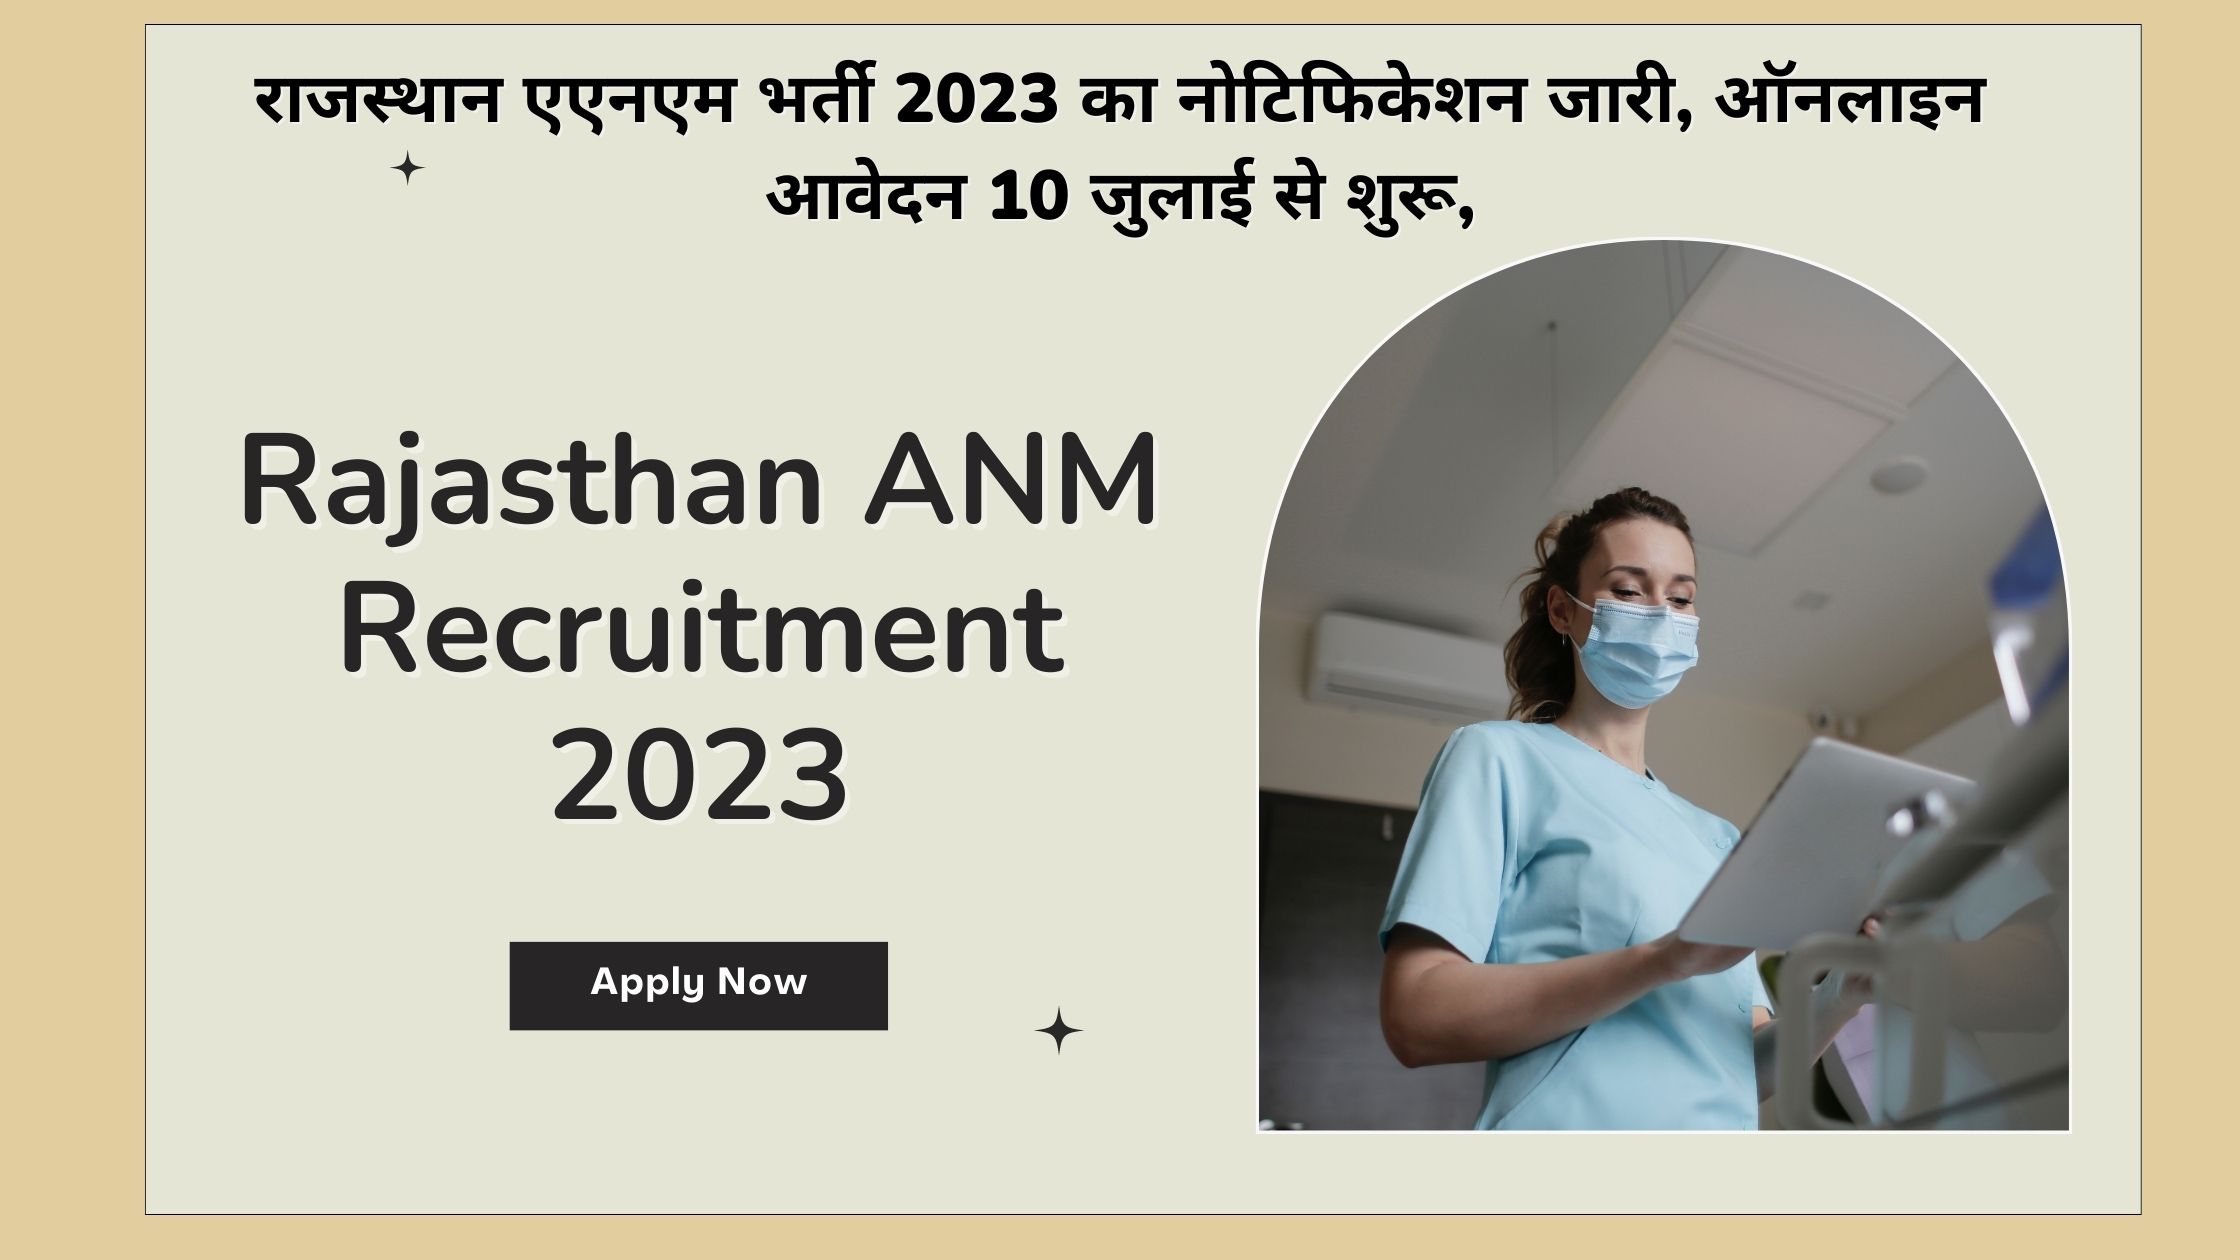 Rajasthan ANM Recruitment 2023 Apply Now